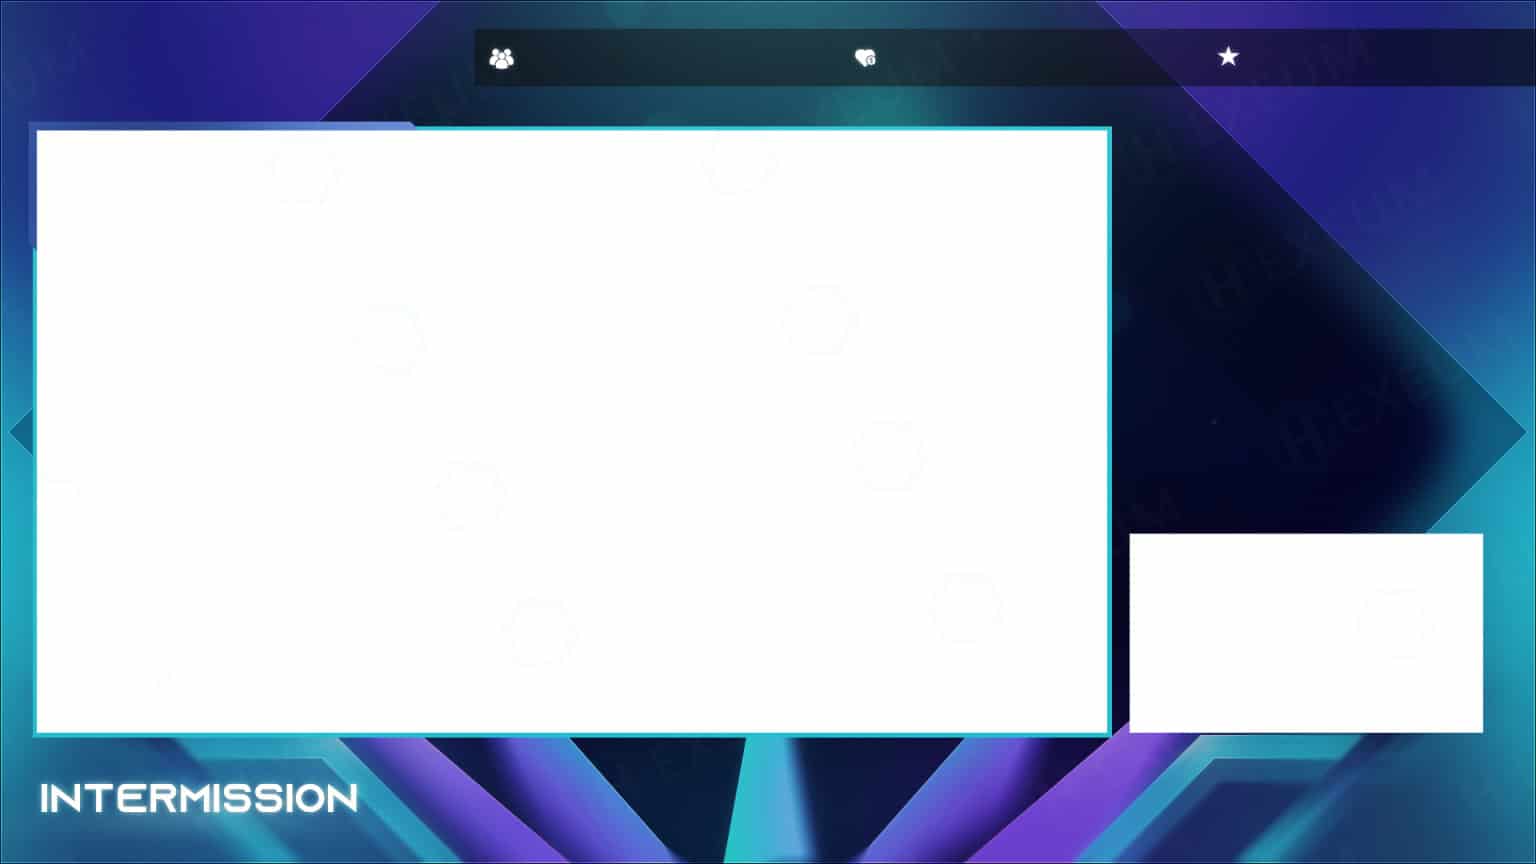 1920x1080 intermission screen for twitch